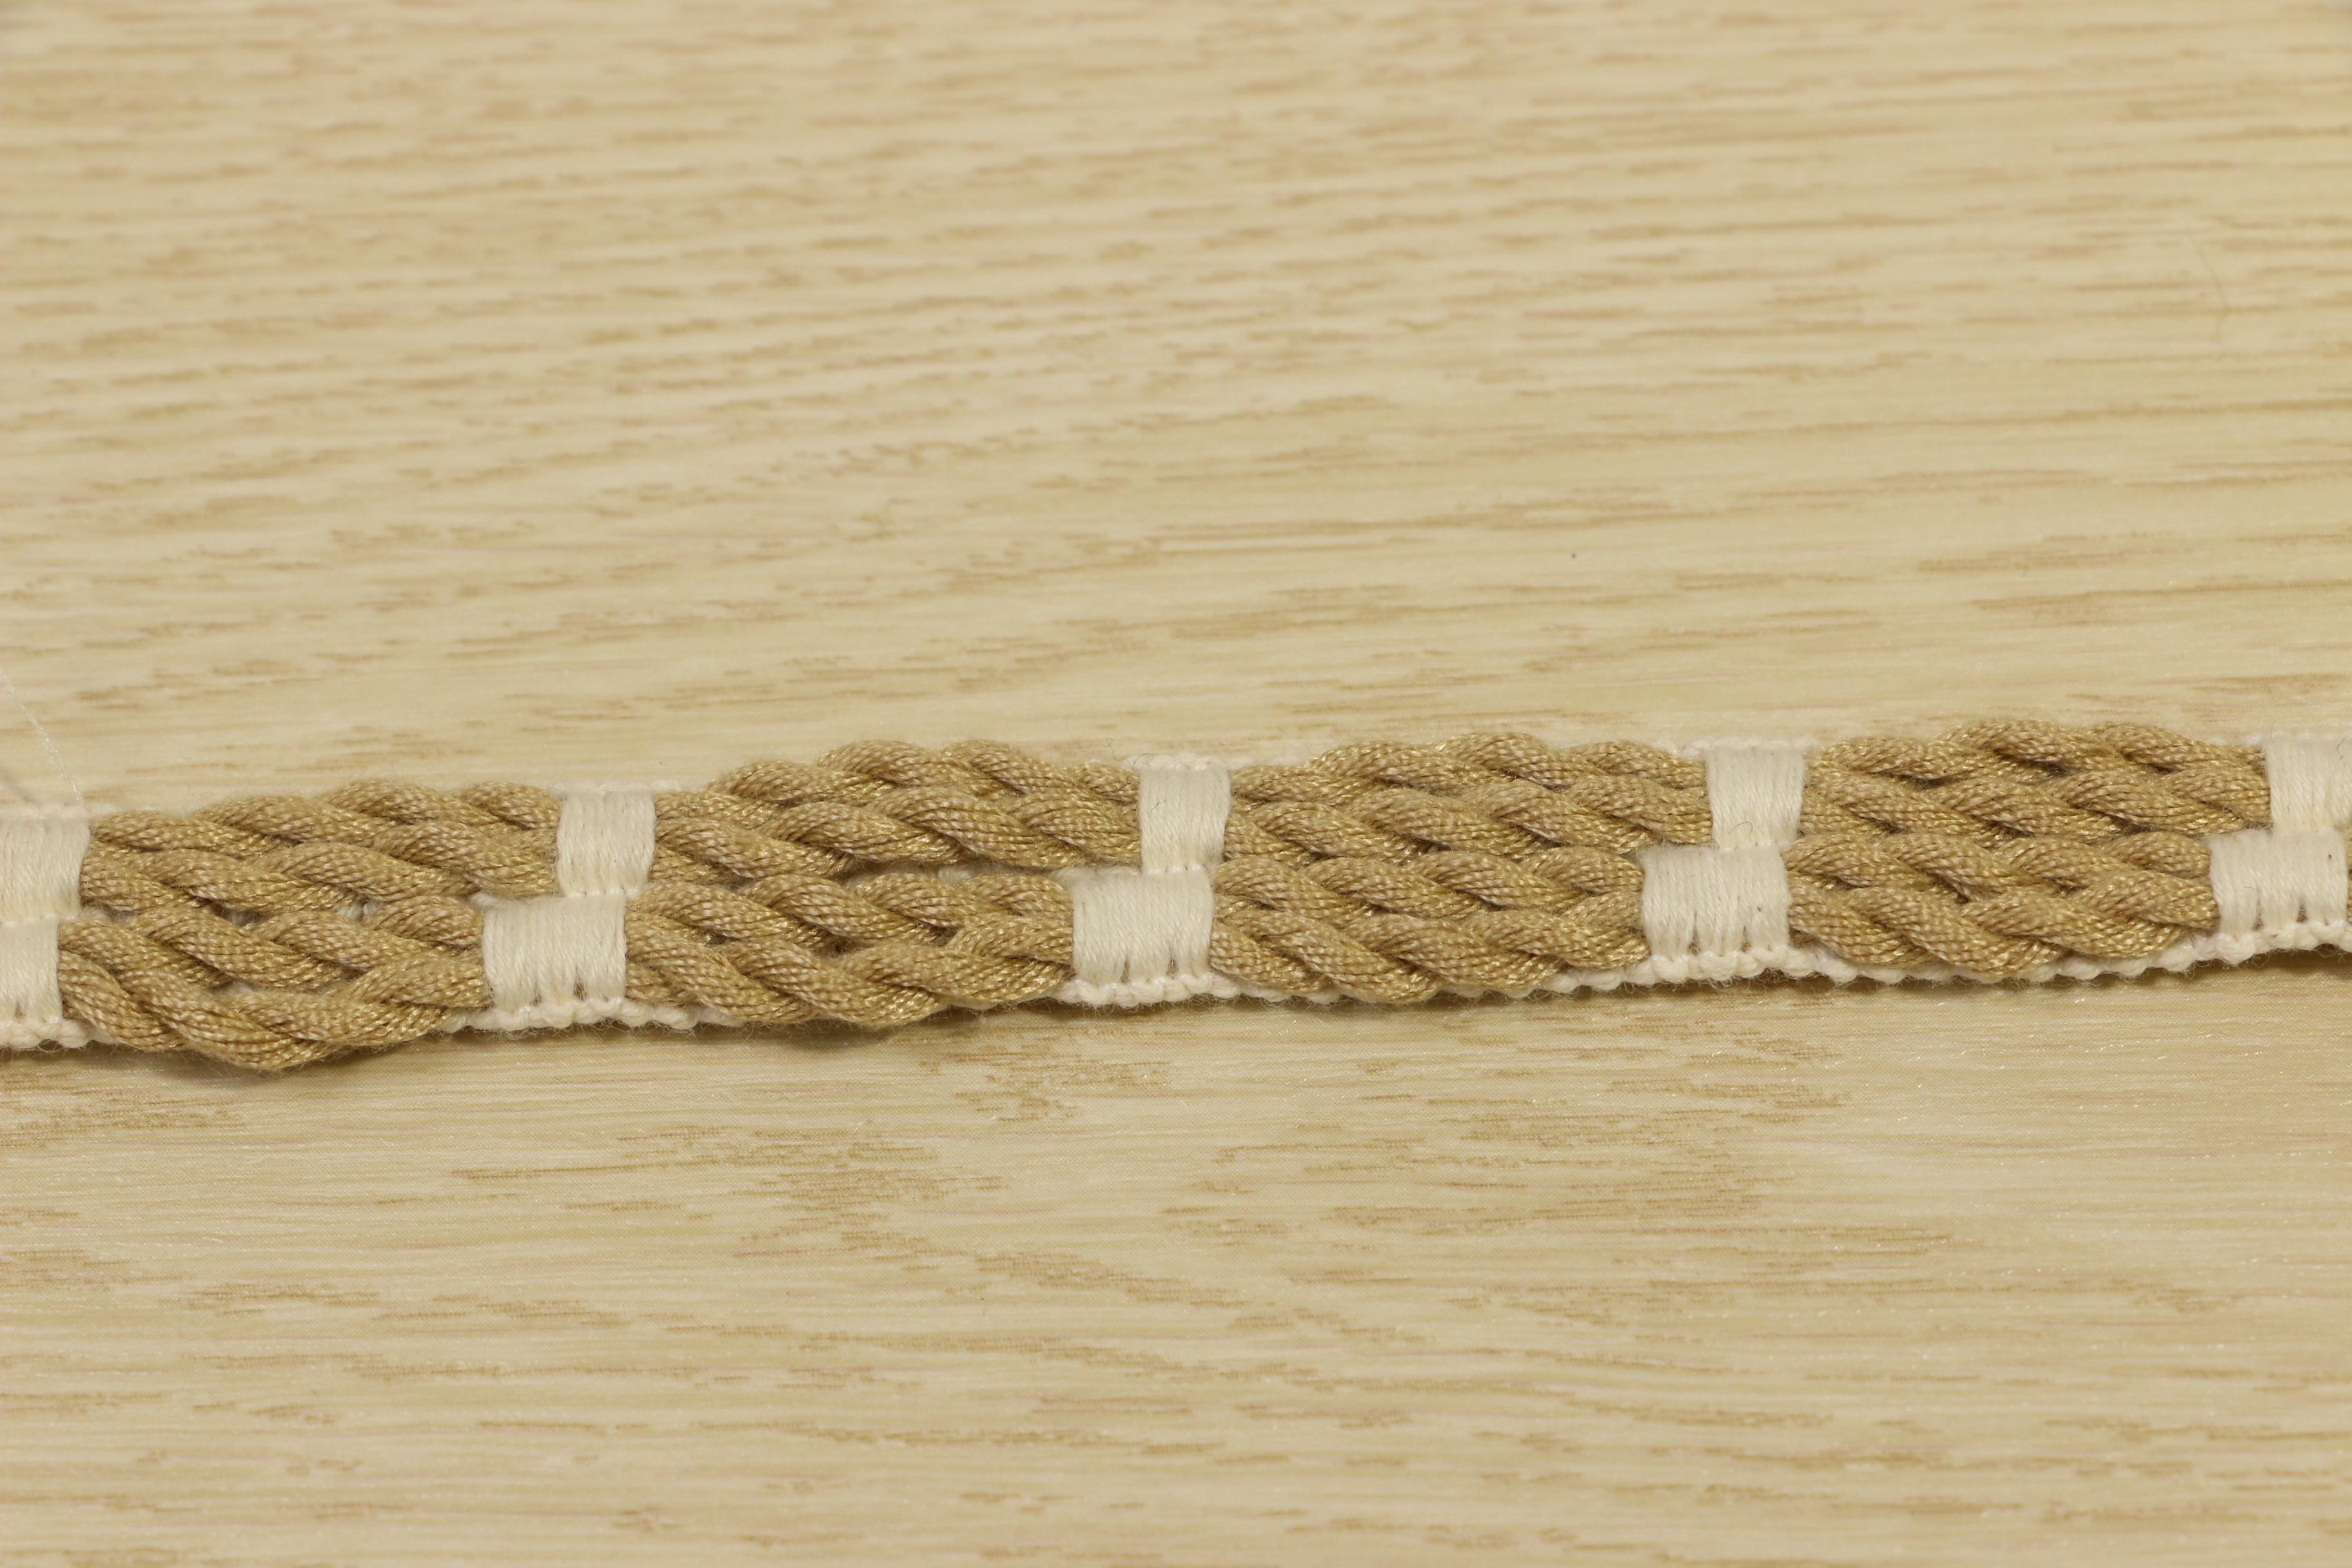  Twine Webbing Woven Tapes Rustic Hessian Cotton Material Breathable ODM Manufactures